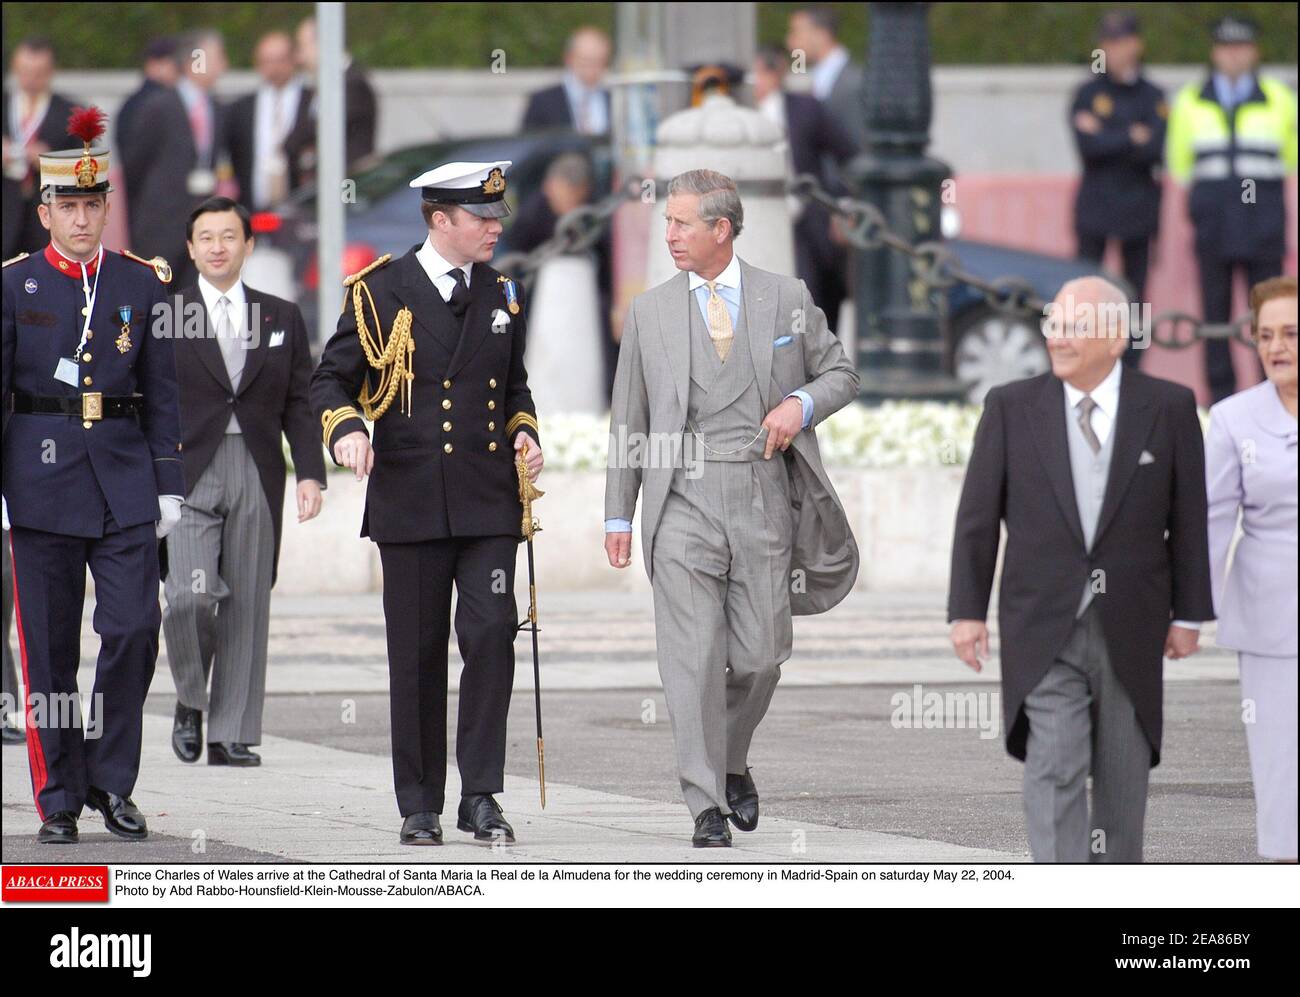 Prince Charles of Wales arrive at the Cathedral of Santa Maria la Real de la Almudena for the wedding ceremony in Madrid-Spain on saturday May 22, 2004. Photo by Abd Rabbo-Hounsfield-Klein-Mousse-Zabulon/ABACA. Stock Photo